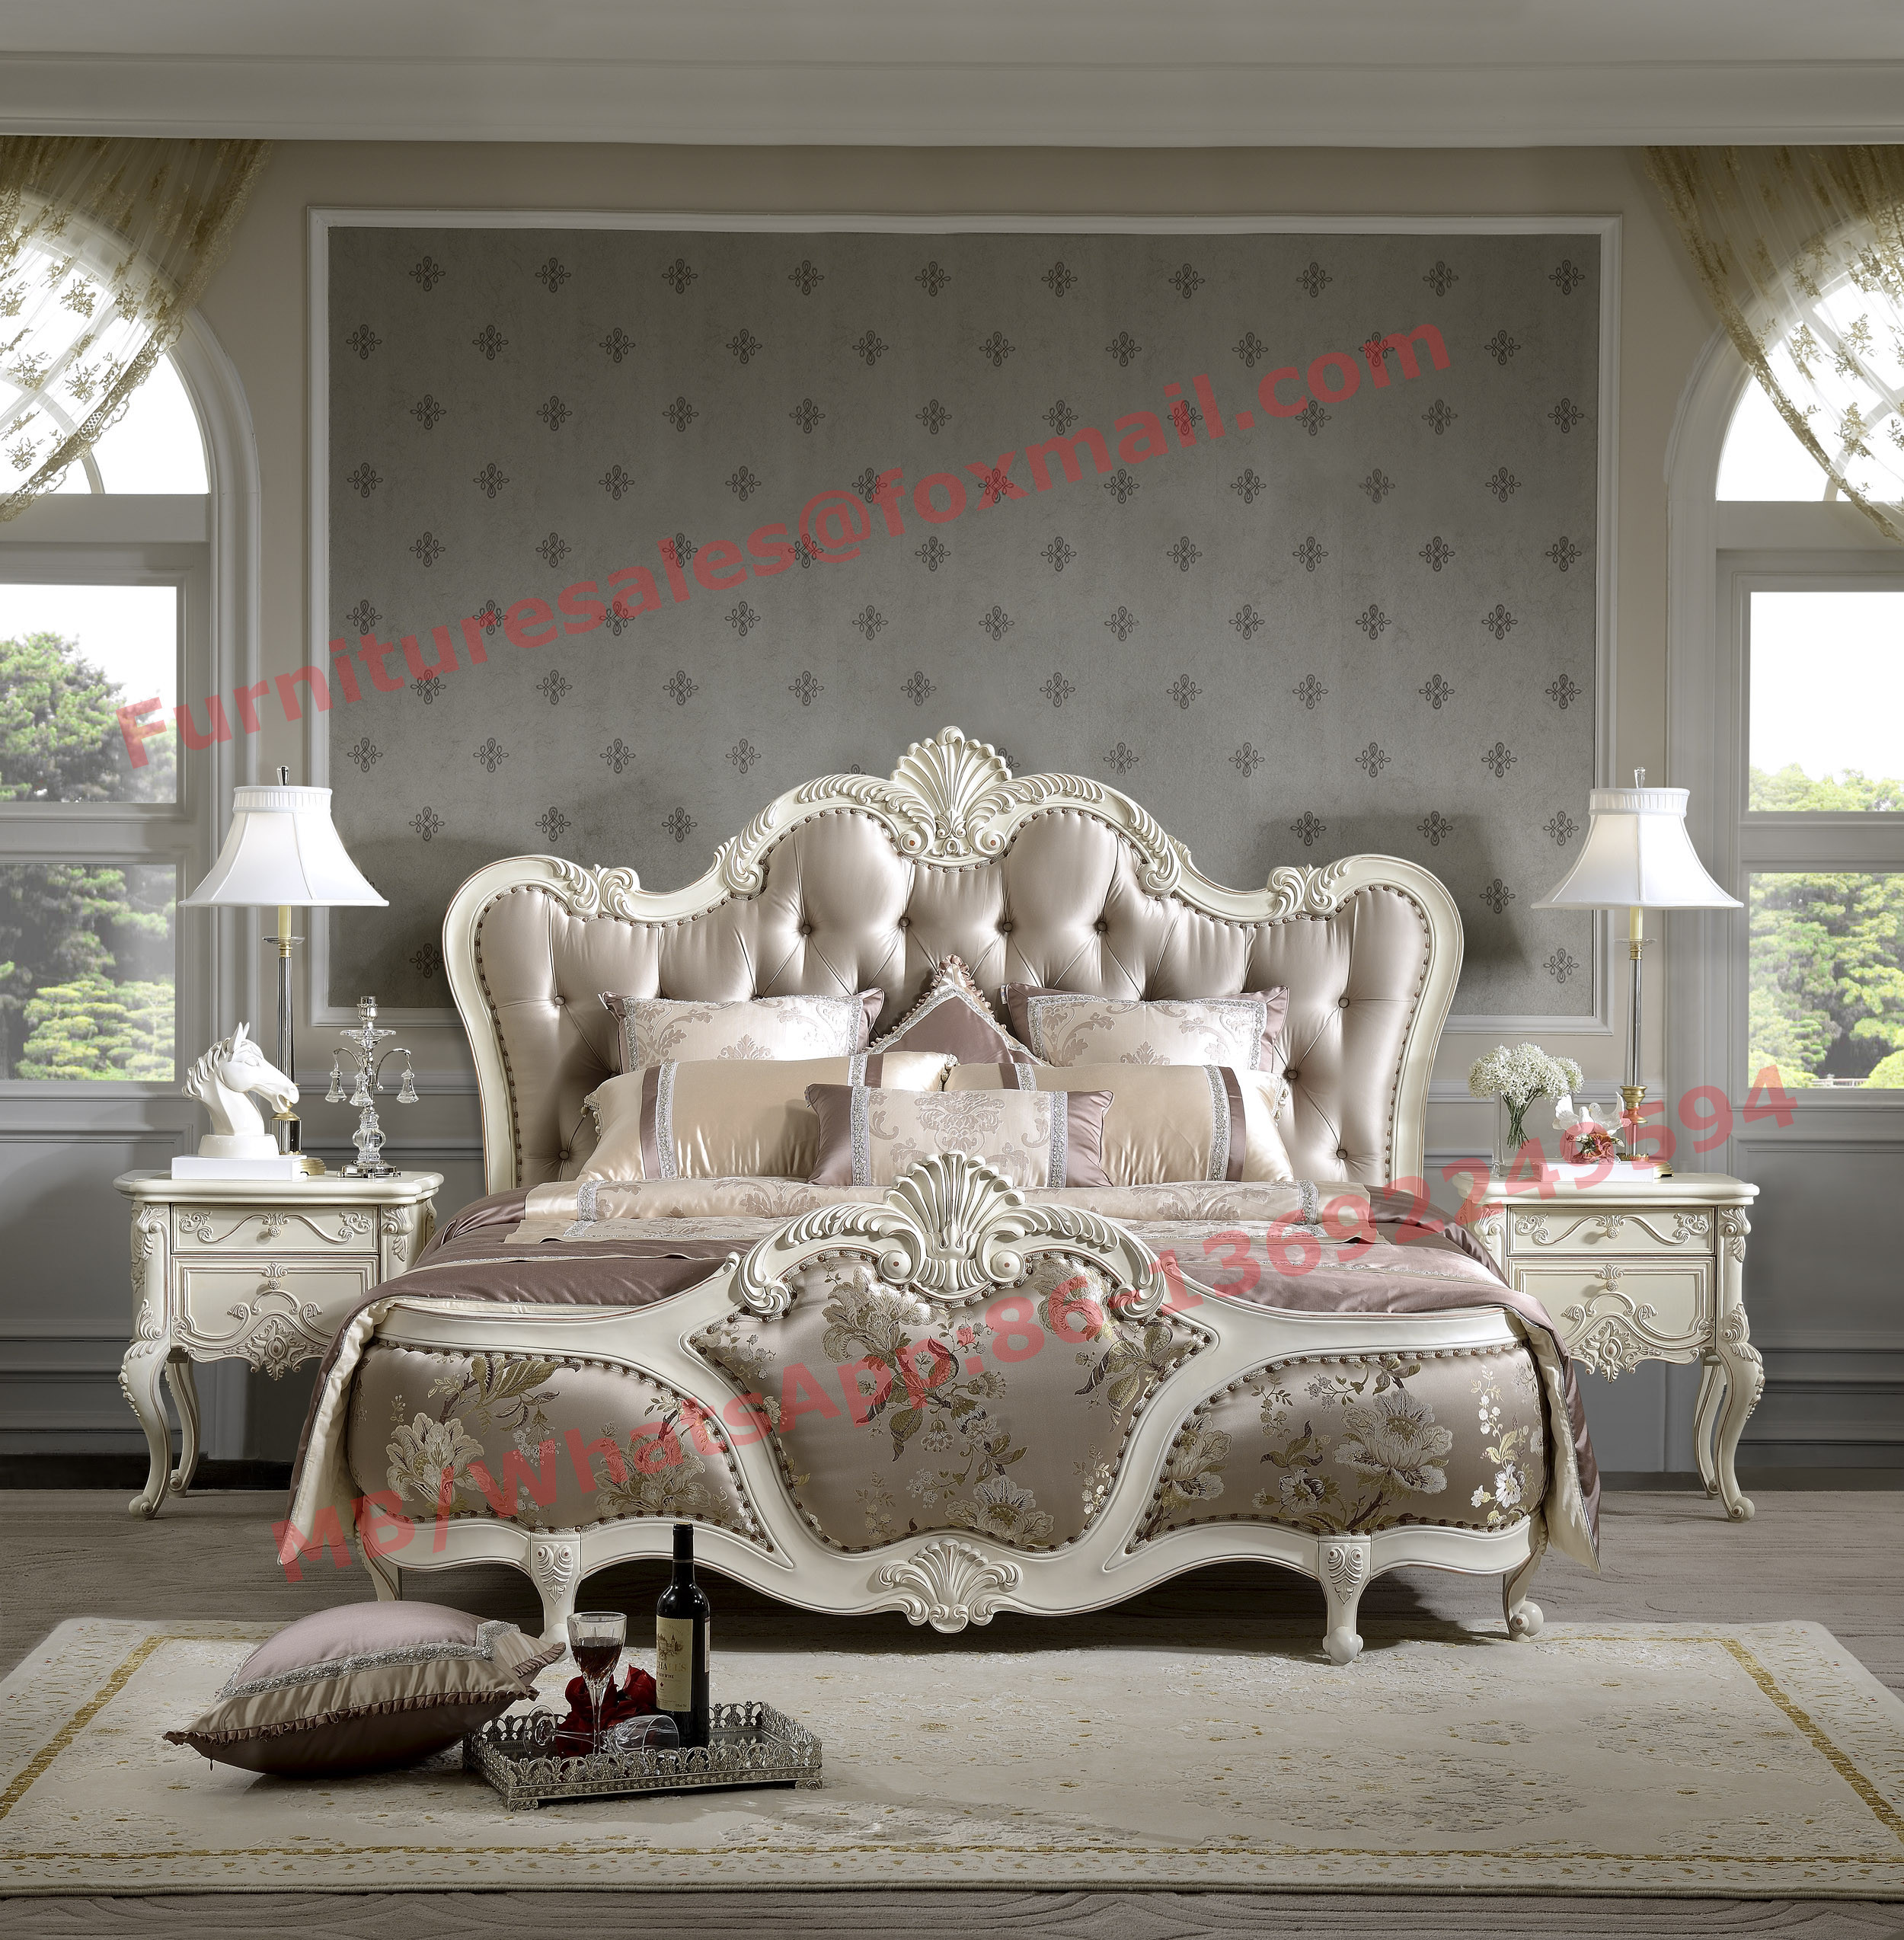 Best Family use from China Factory Outlets Decoration Bedrooms Furniture set in Cheap Price wholesale